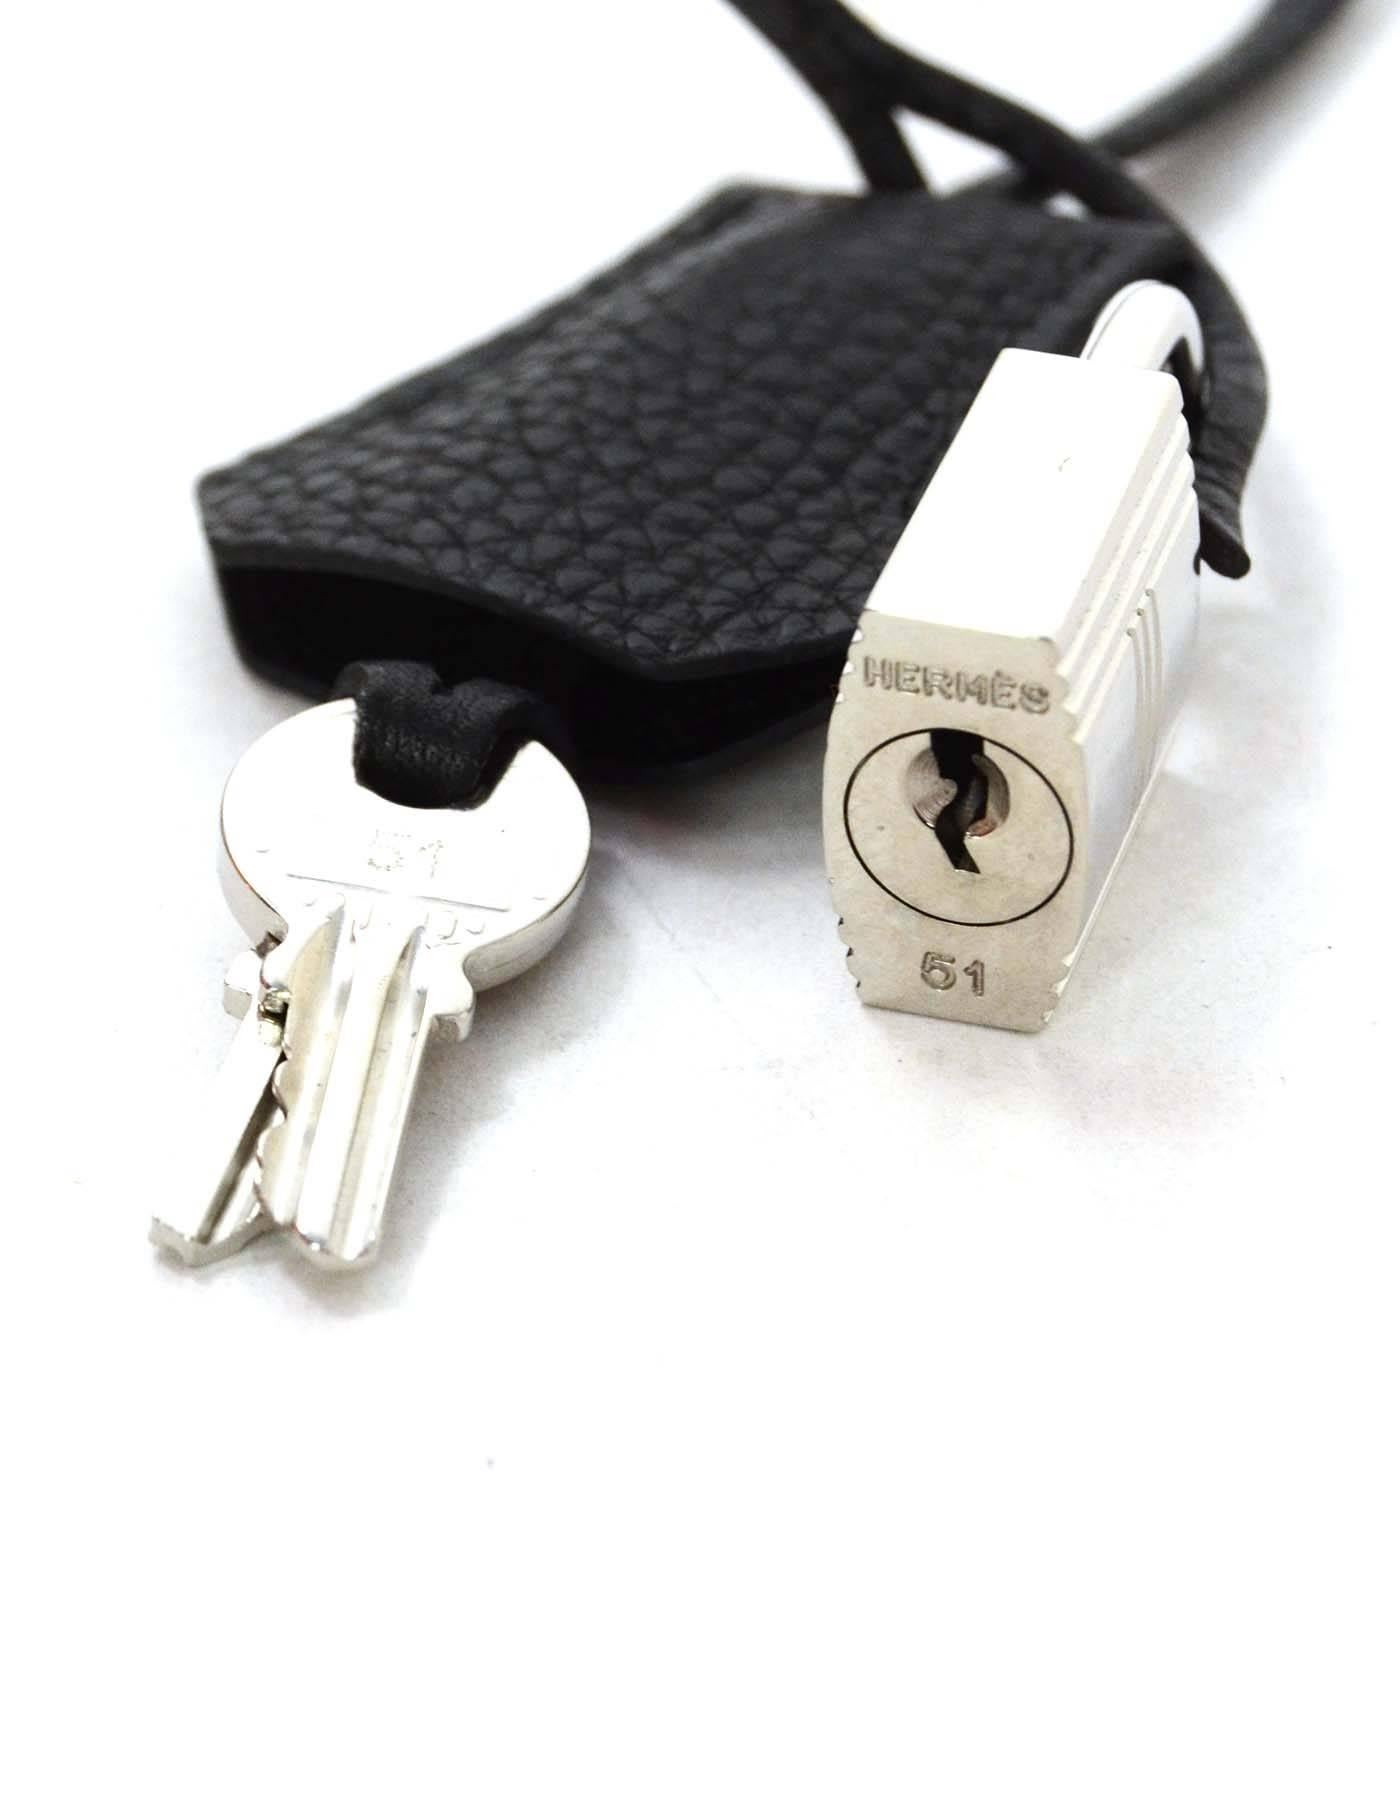 Hermes Black Togo Clochette & Palladium Padlock 
Color: Black and silvertone
Materials: Togo leather and palladium metal
Closure: Padlock with two keys
Stamp: Padlock- Hermes 51
Overall Condition: Excellent pre-owned condition
Includes: Hermes